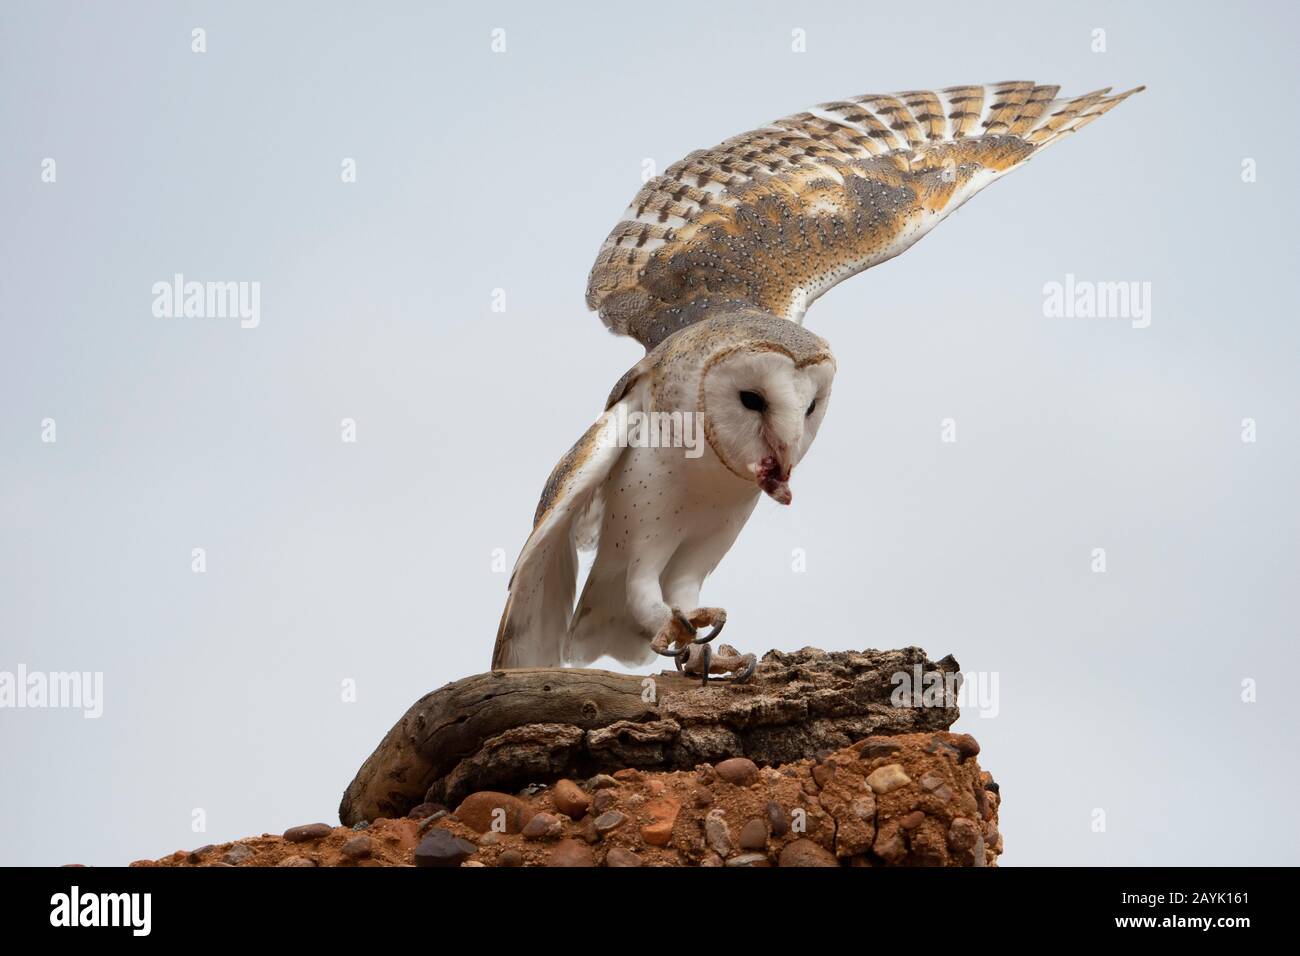 Barn Owl (Tyto alba) with an open wing and feeding Stock Photo